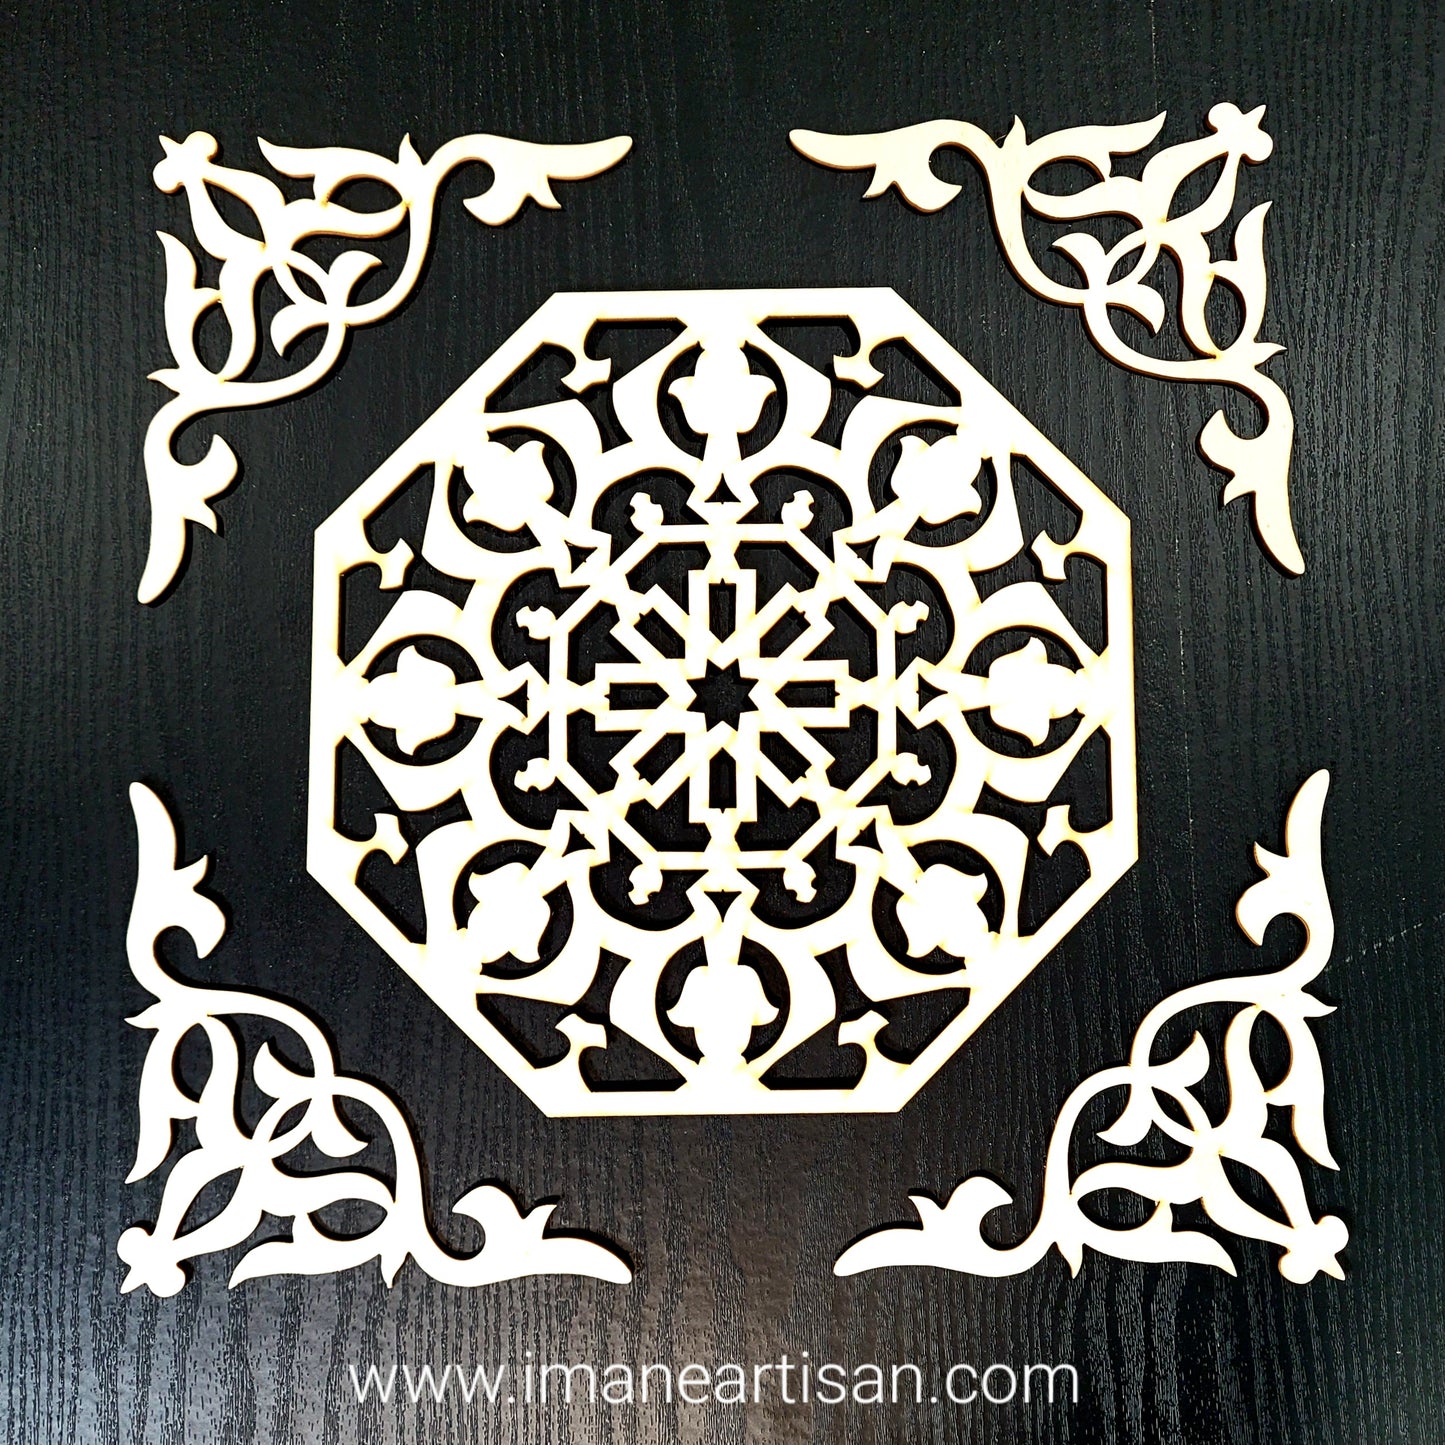 C-005/ Corner Accesory / Moroccan Geometric Art / Carved Wood / Laser Cut Wood / Moroccan Arabesque / Craft and DIY / Zowaqa Maghribia